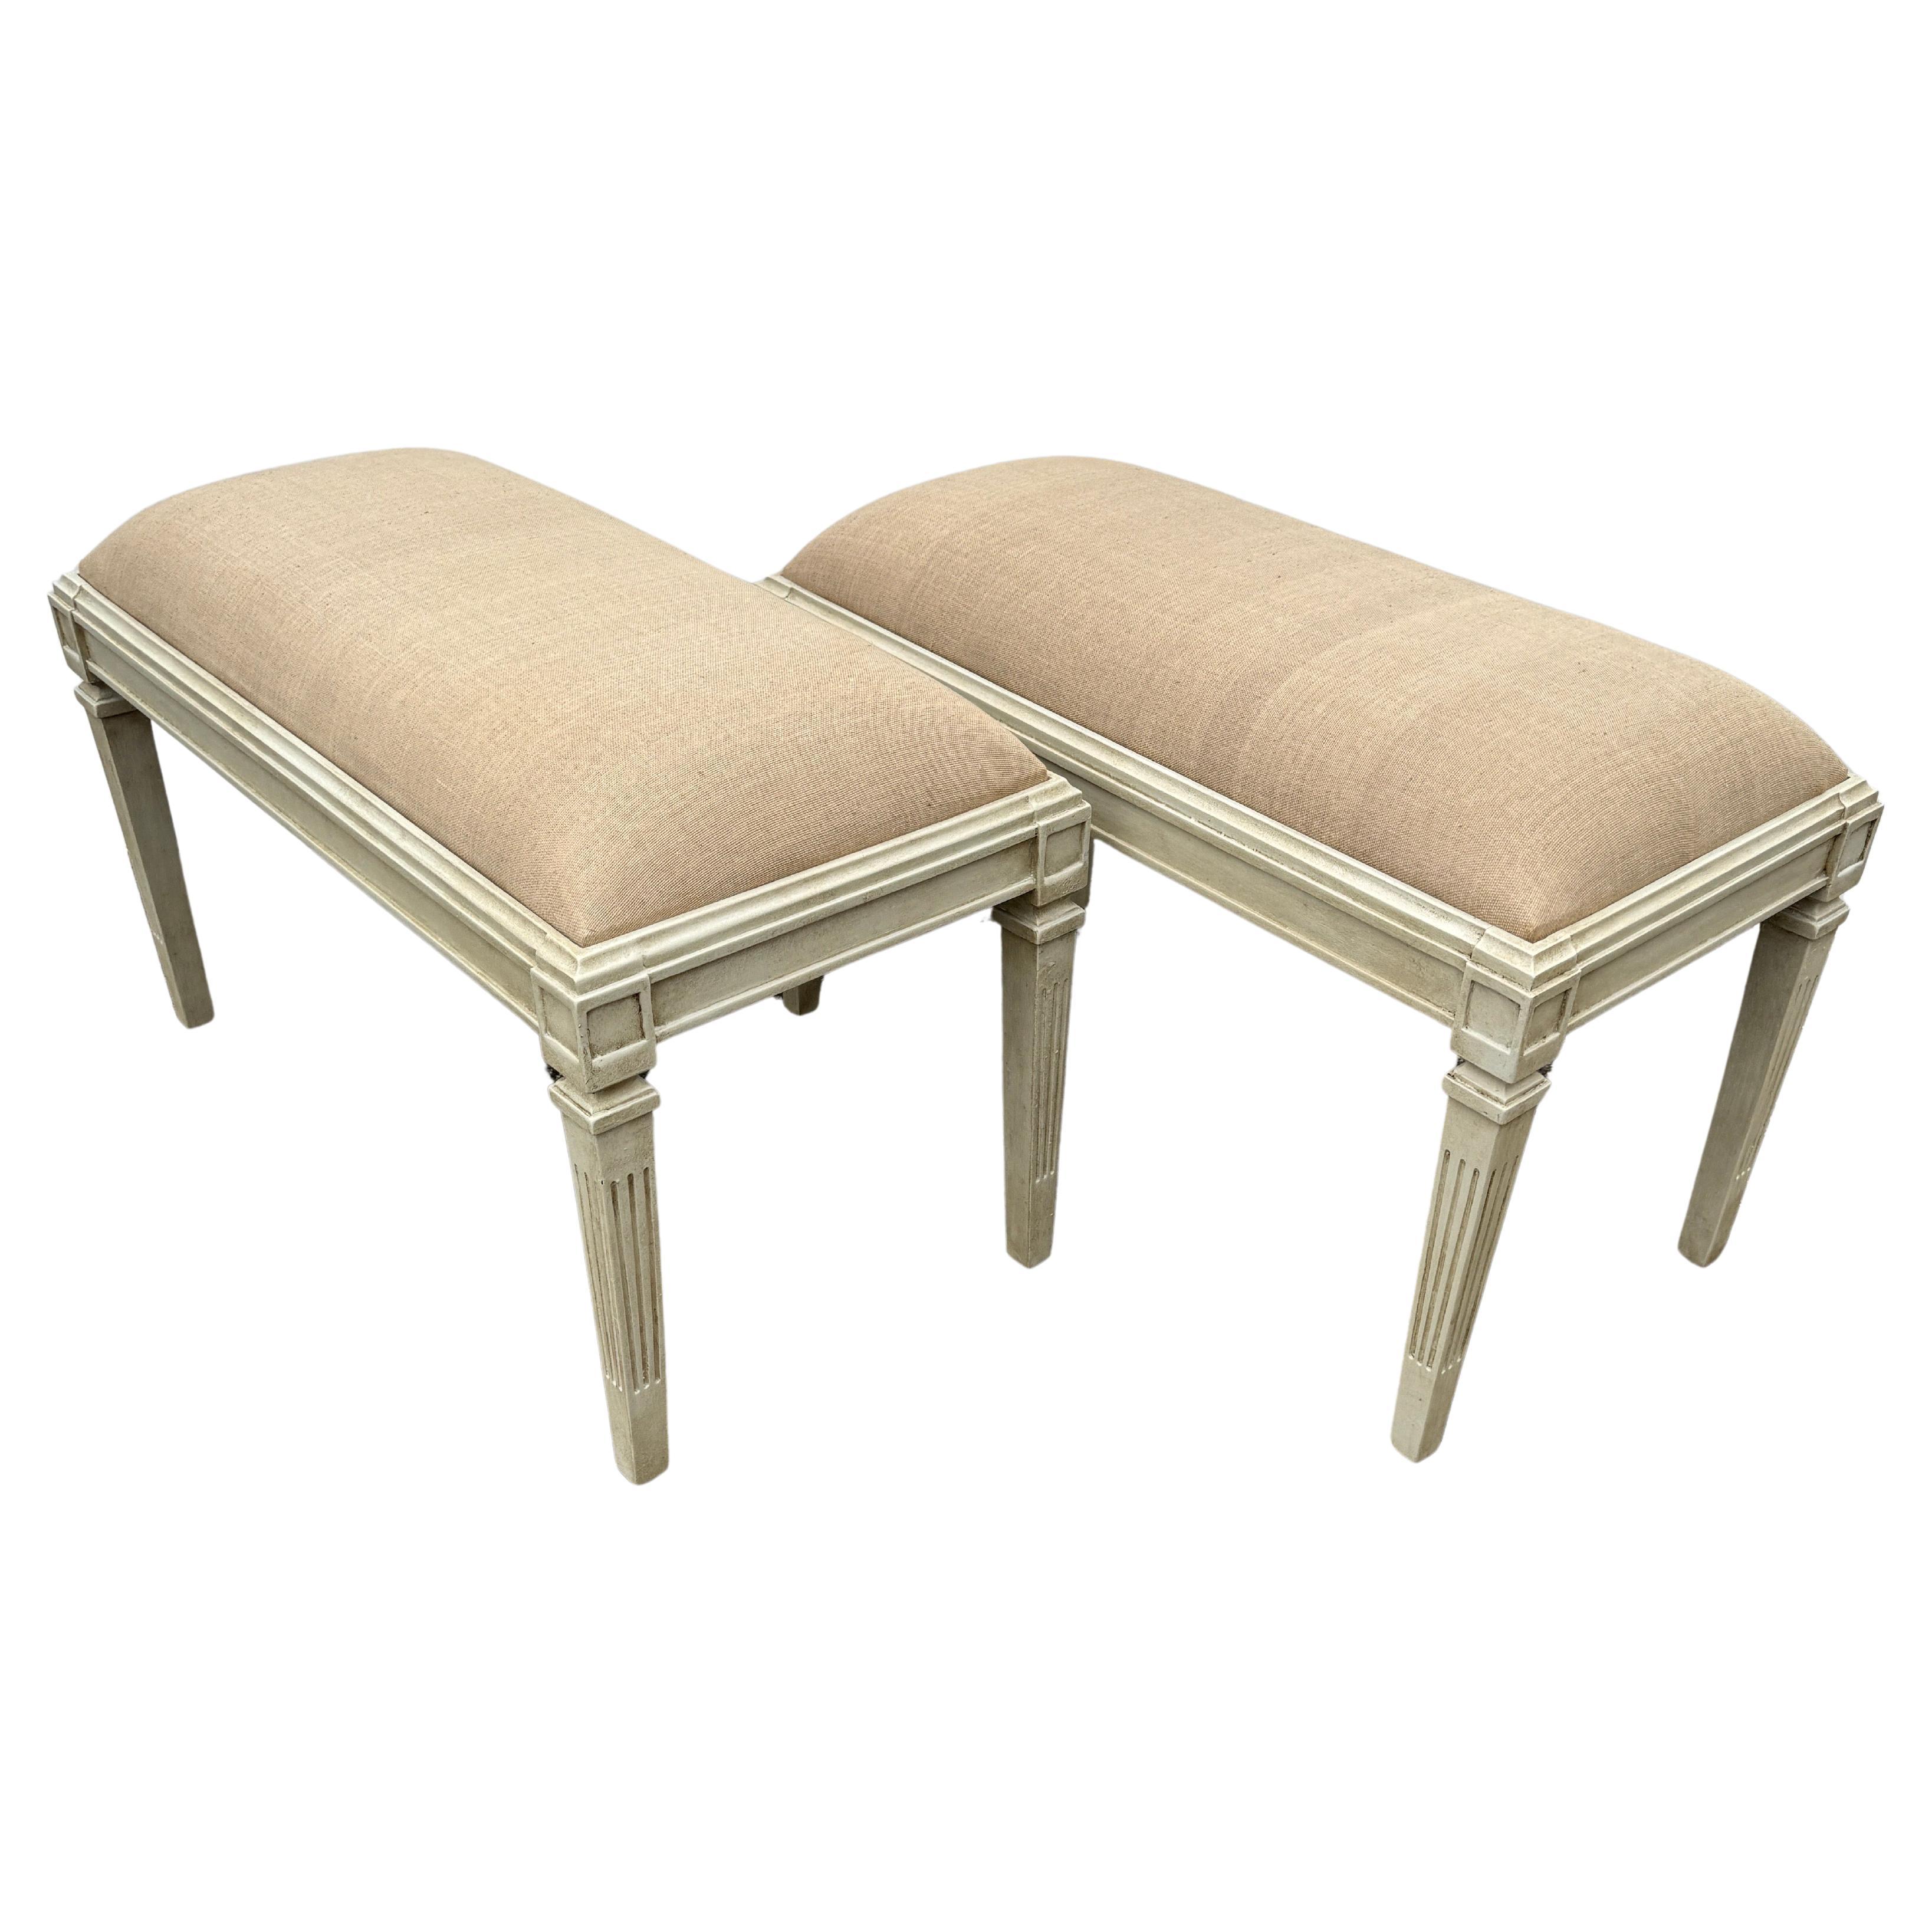 Pair Swedish Gustavian Style Painted Upholstered Benches